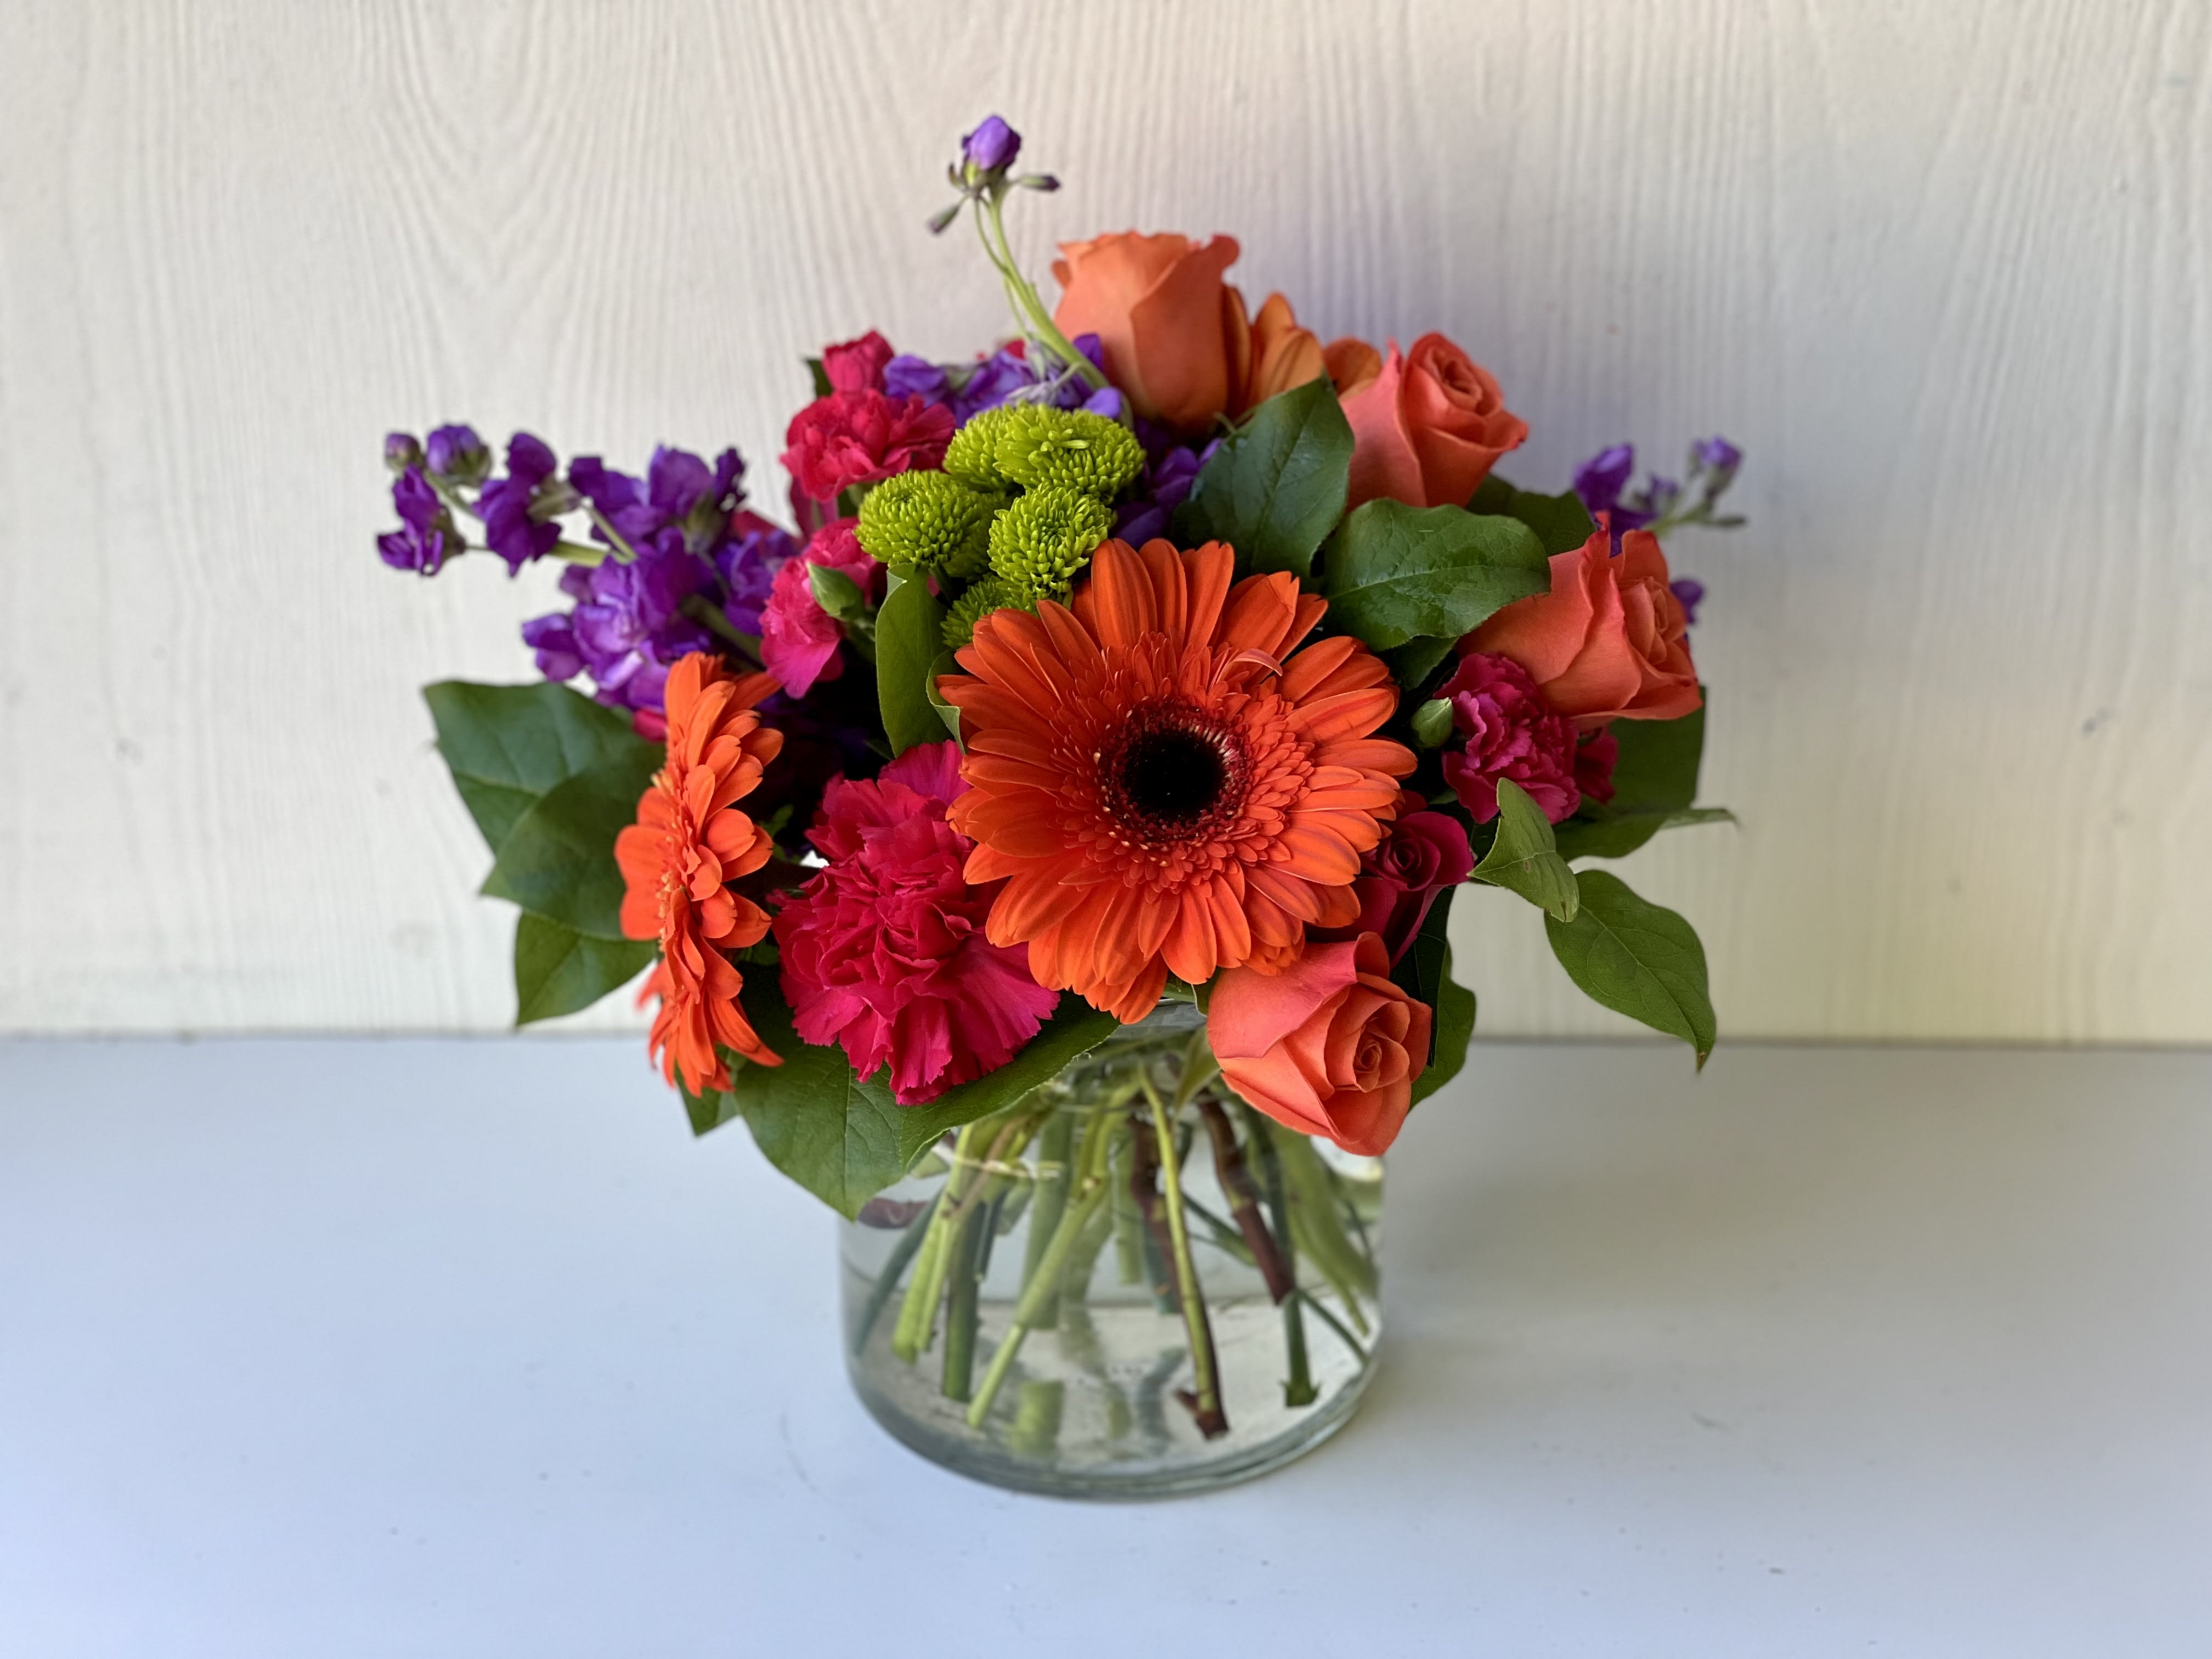 EC03 - Fiesta Bouquet - Get ready to party with the Fiesta Bouquet! This bright and cheerful arrangement is the perfect way to add some fun and color to any celebration. The joyful Fiesta Bouquet is designed with a combination of vibrant flowers of orange, pink and purple, featuring flowers such as stock, gerber daisy, roses, spray roses and carnations designed in a clear vase.  Size Pictured: Standard